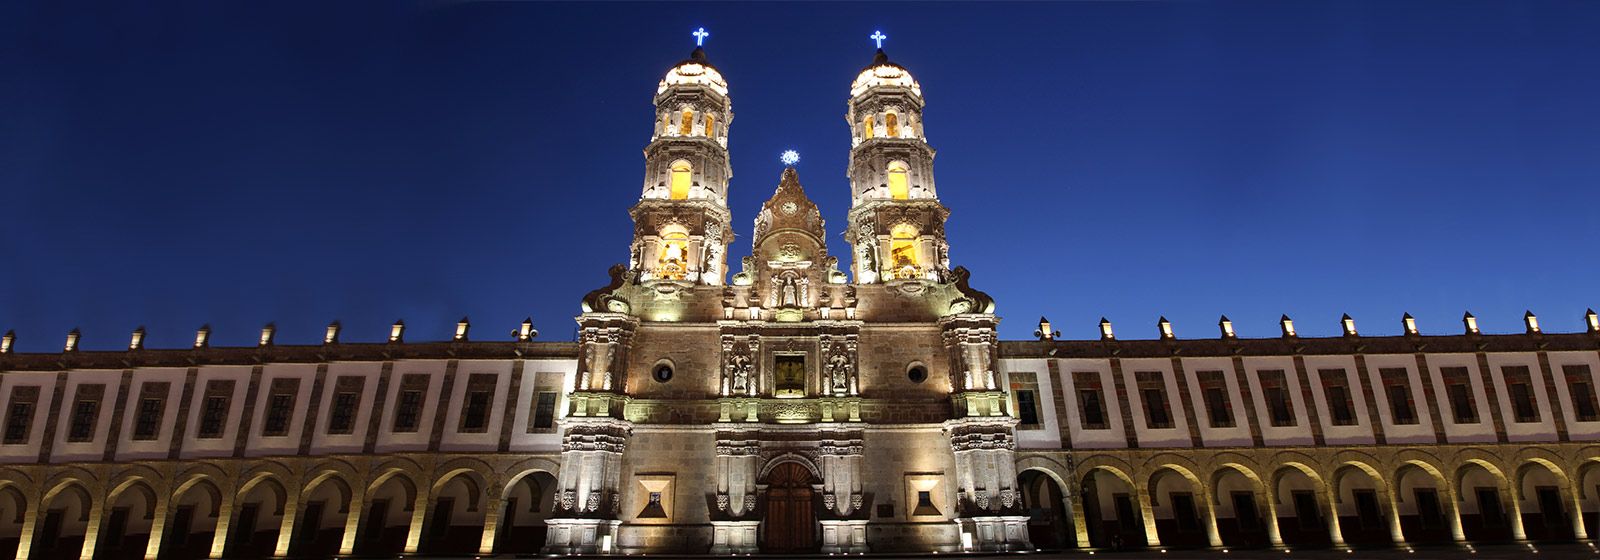 View of Our Lady of Zapopan